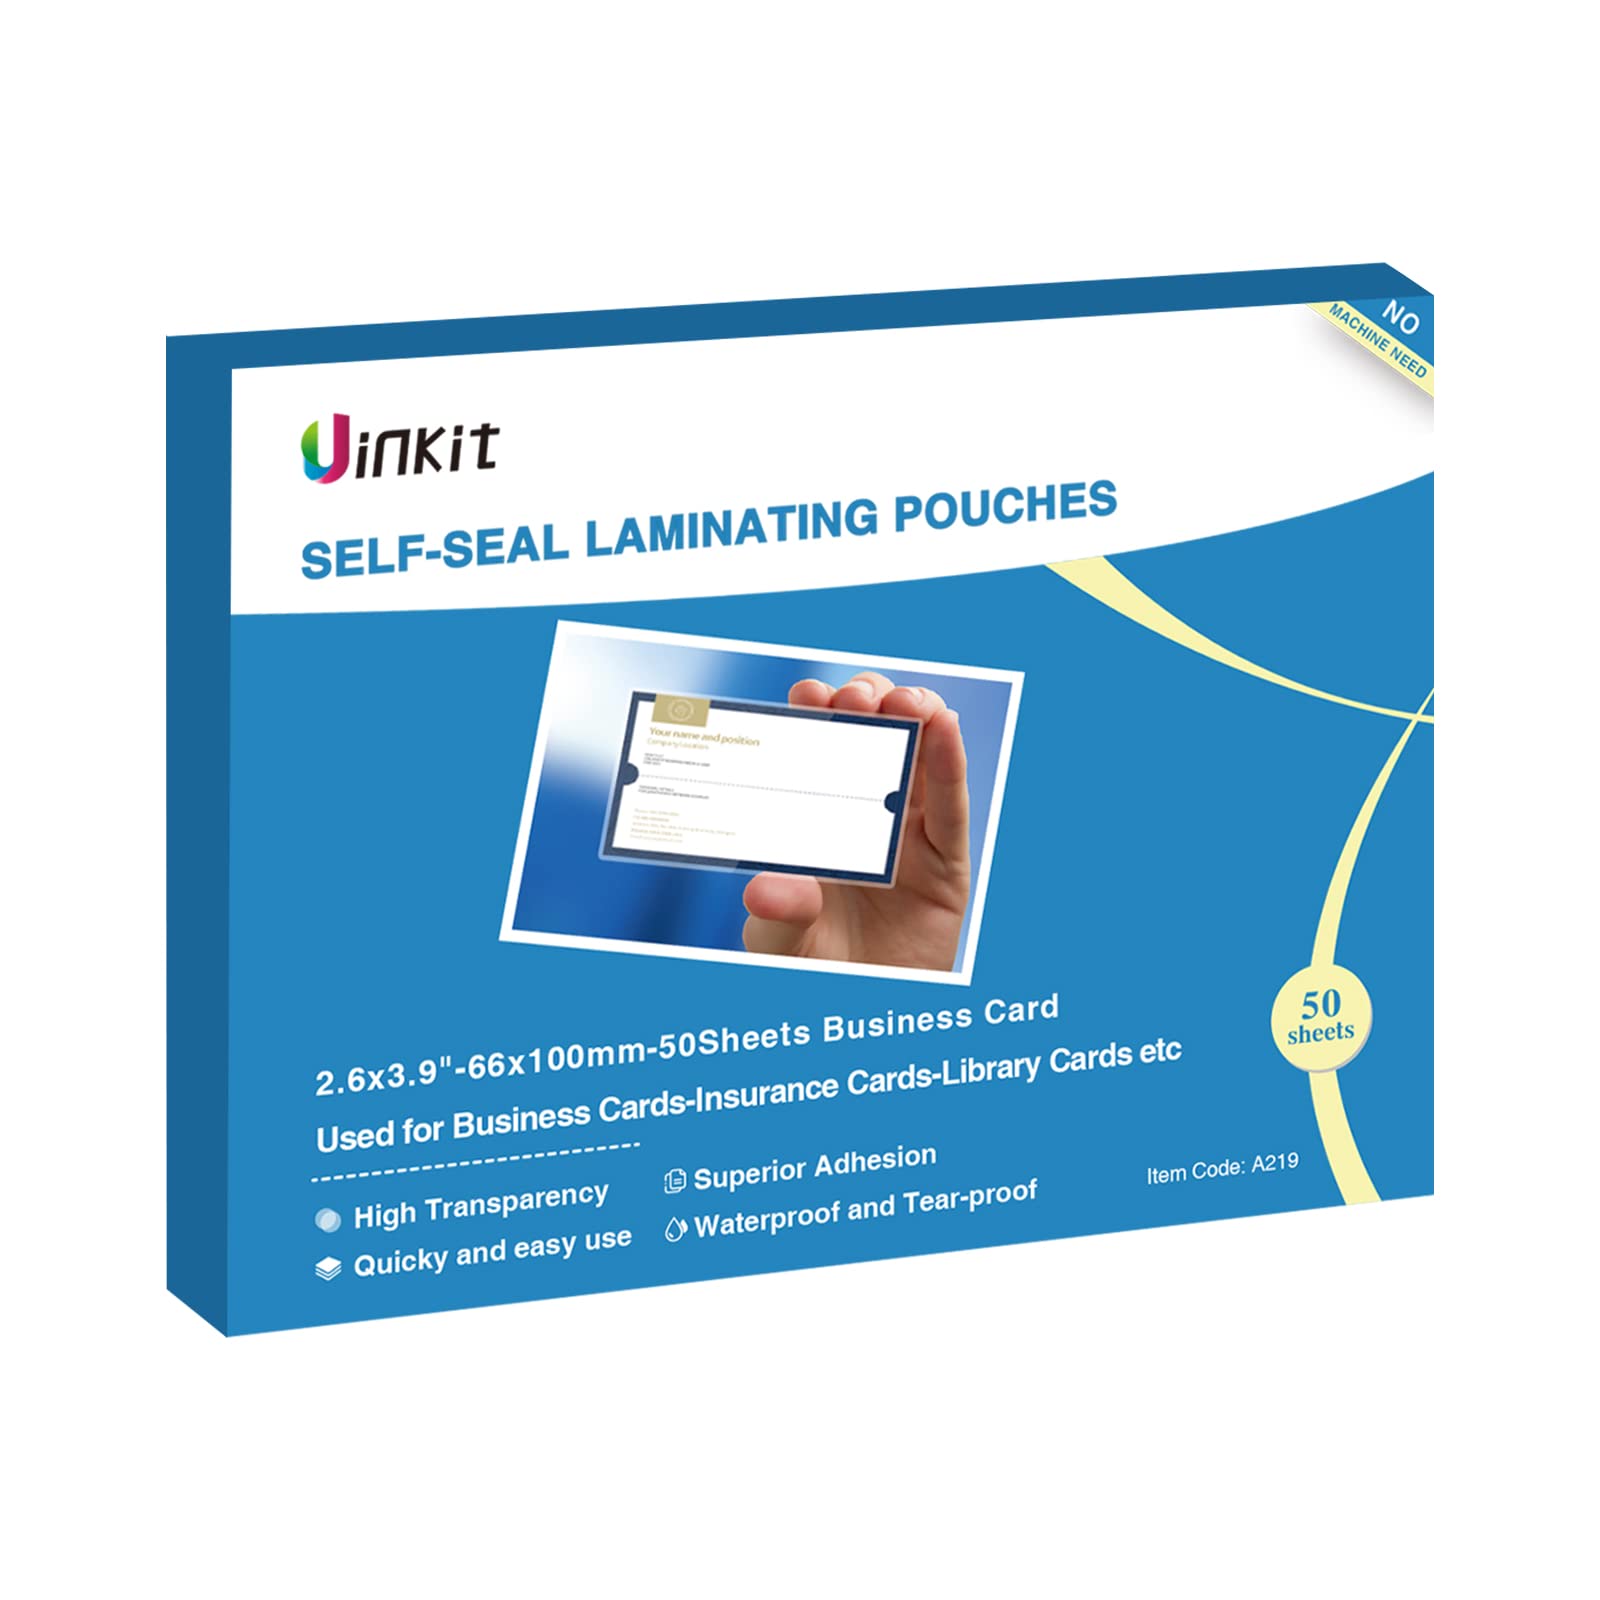 Uinkit Self Sealing Laminating Pouches Self Adhesive Laminating Sheets for  Cards 2.6x3.9inches 50Pack 10Mil Thick Gloss Finish No Machine Need  (2.6x3.9Inchesx50Pack)